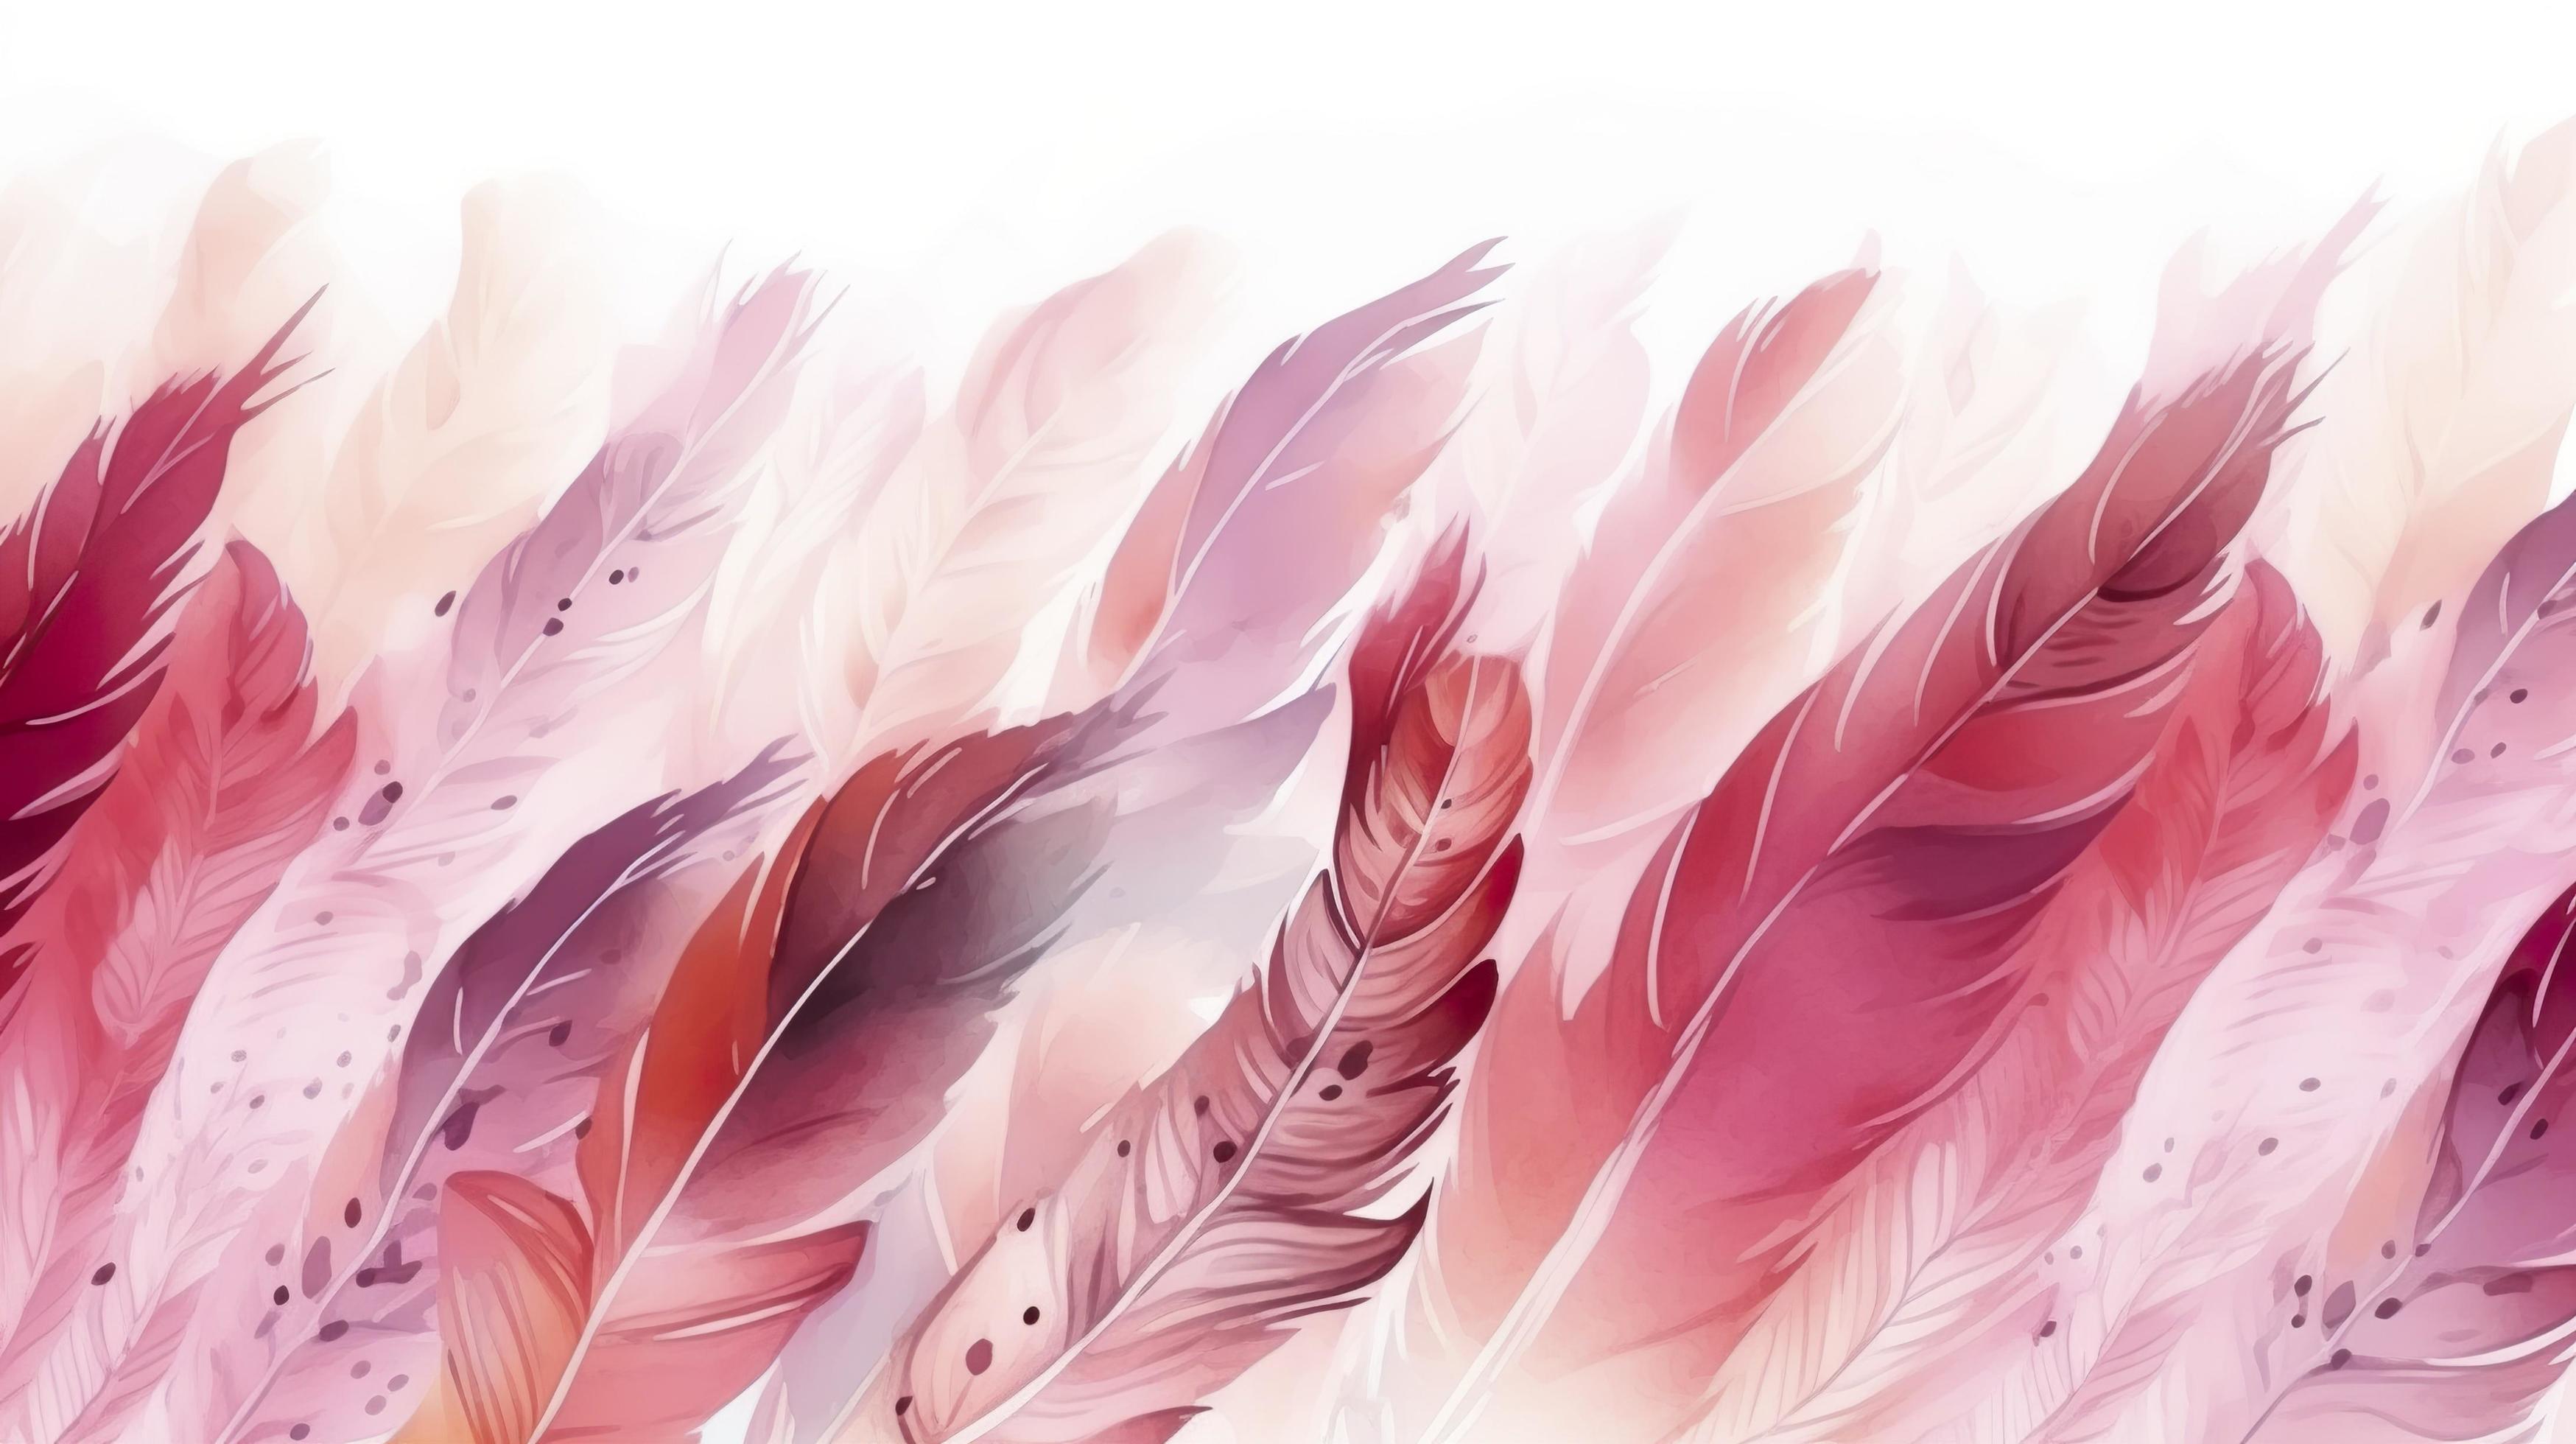 A banner with pink and purple feathers - Pink anime, feathers